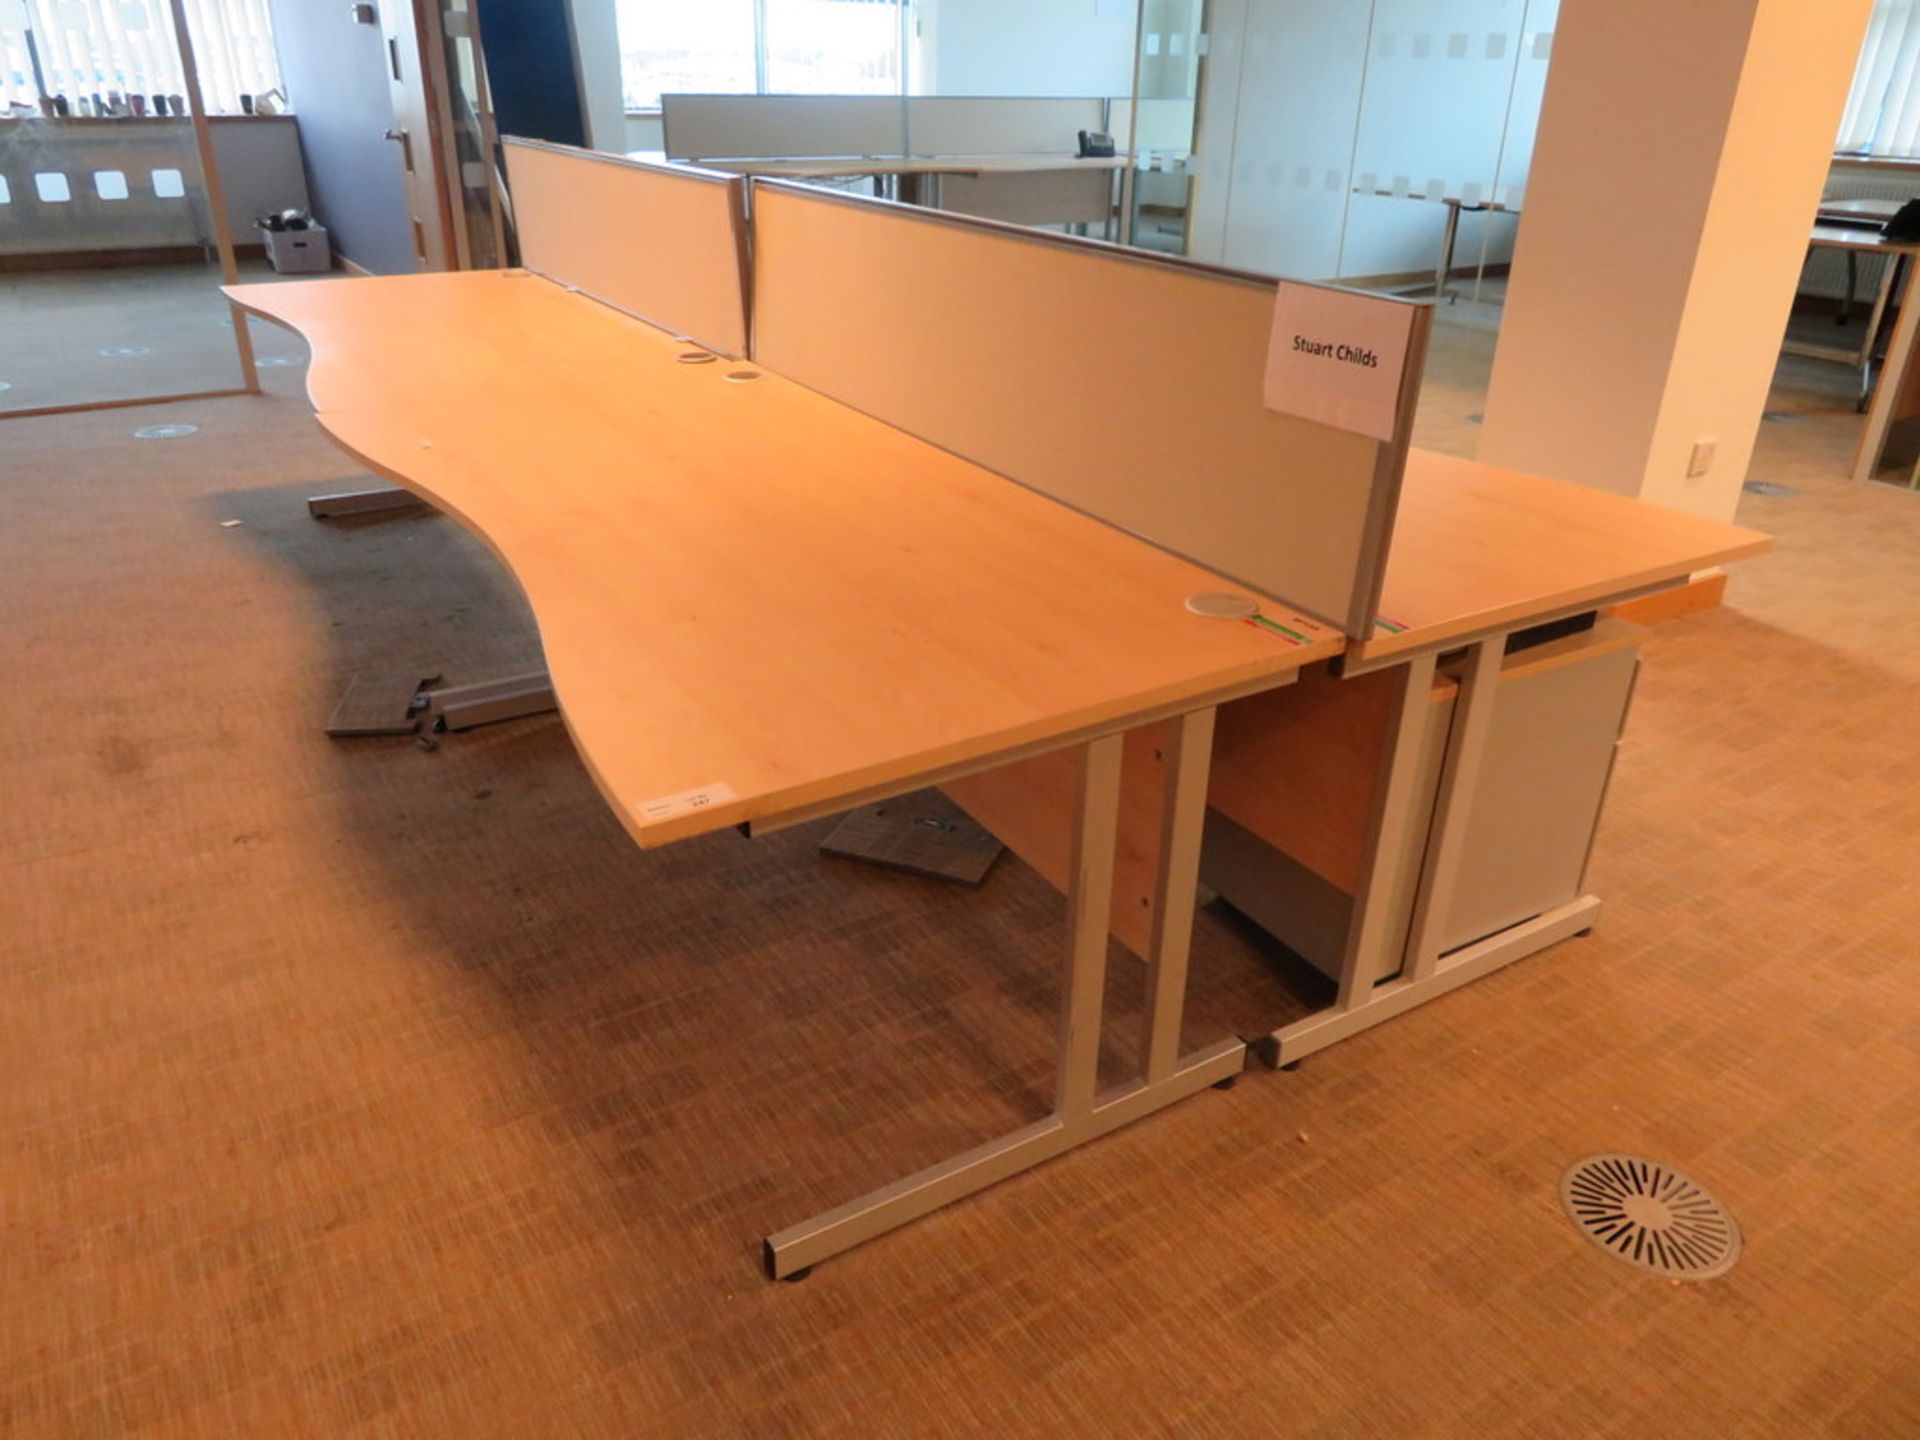 3 X LIGHTWOOD EFFECT CURVED-FRONT OFFICE DESK C/W 2 X DESK DIVIDERS AND